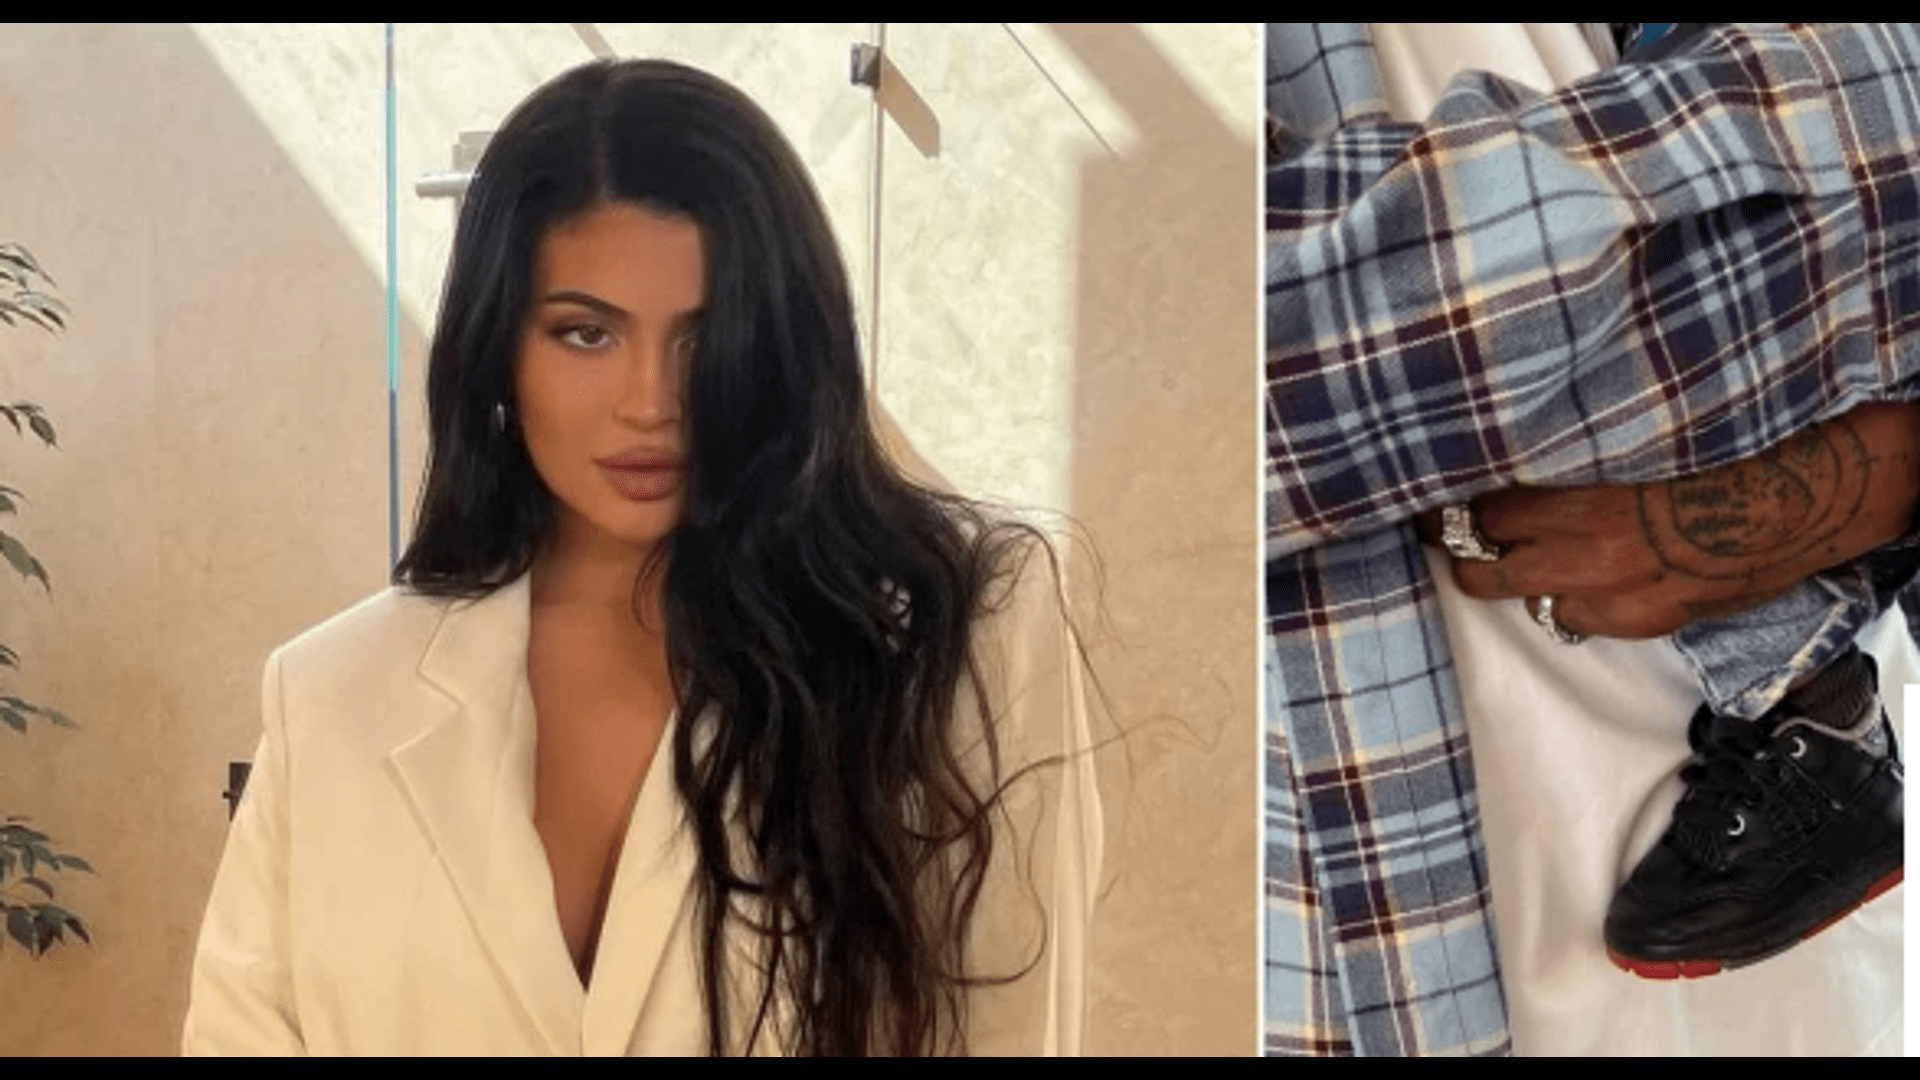 kylie-jenner-shares-rare-photo-of-son-after-changing-his-name